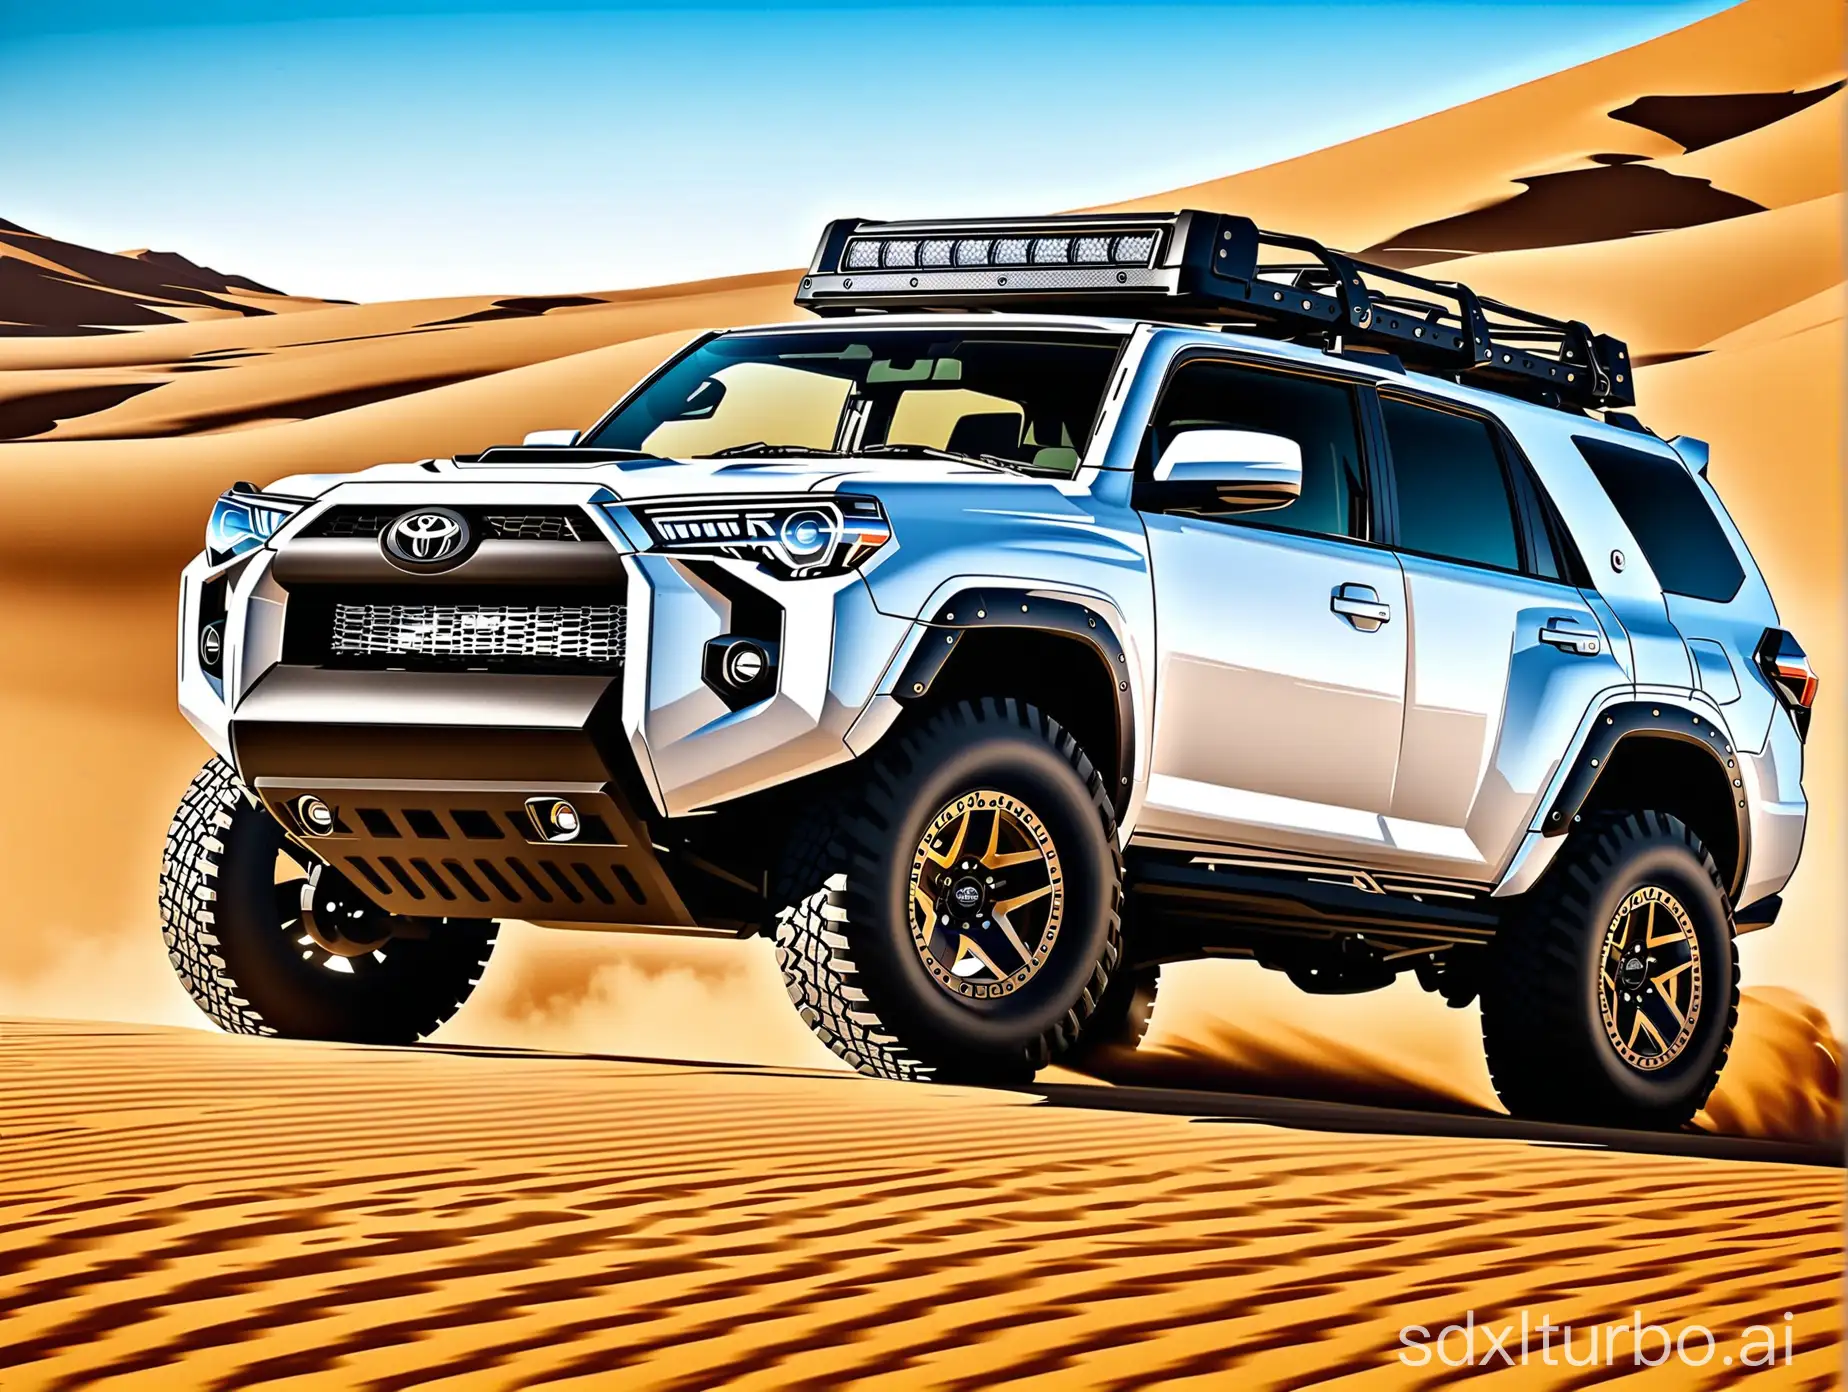 "Design a custom-made SUV that combines the rugged body design of a Toyota 4Runner with the bold headlights of a Dodge TRX. Integrate the TRX's distinctive headlights seamlessly into the 4Runner's front fascia, giving it a modern and aggressive appearance while retaining the 4Runner's classic boxy silhouette and off-road capabilities. Enhance the vehicle's stance with larger wheels and tires, as well as rugged fender flares and skid plates for added durability. Incorporate advanced features such as a lifted suspension system, off-road driving modes, and advanced traction control to further enhance the vehicle's off-road performance. Aim to create a visually striking and capable SUV that combines the best of both worlds, offering versatility, style, and performance for adventure enthusiasts."